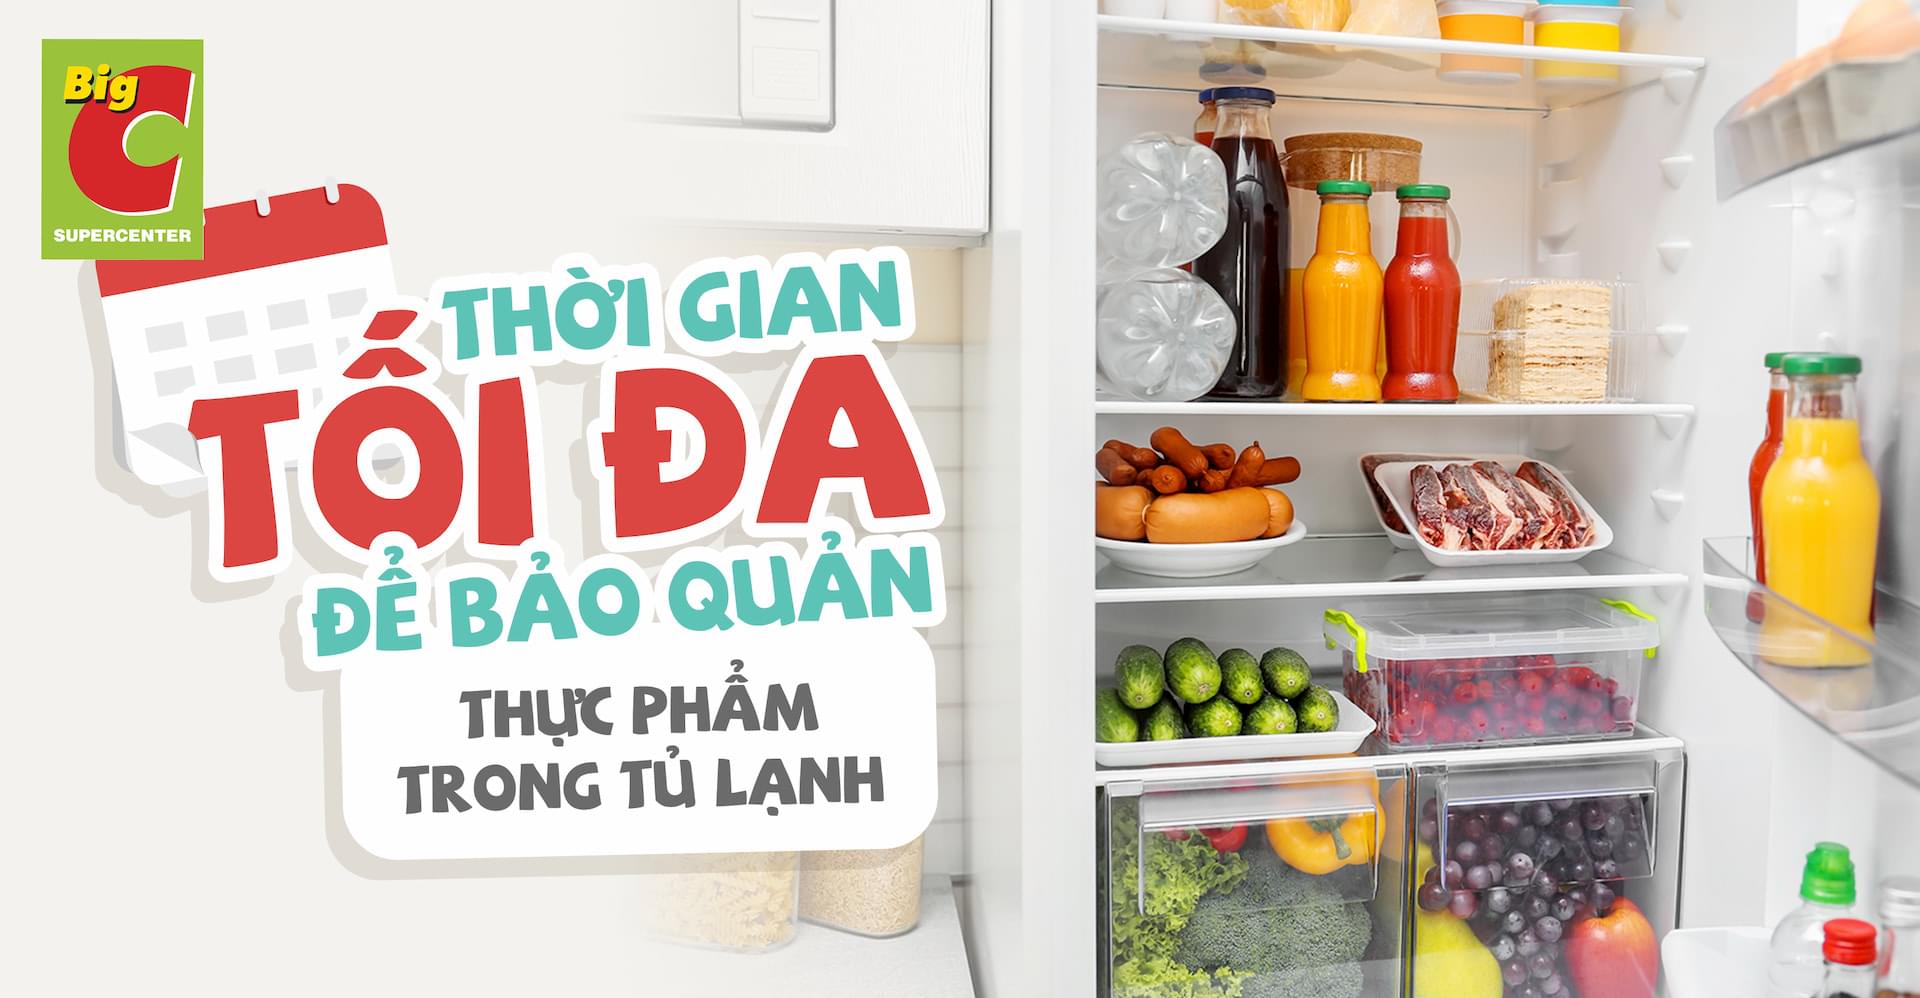 What is the maximum food storage time for refrigerators?